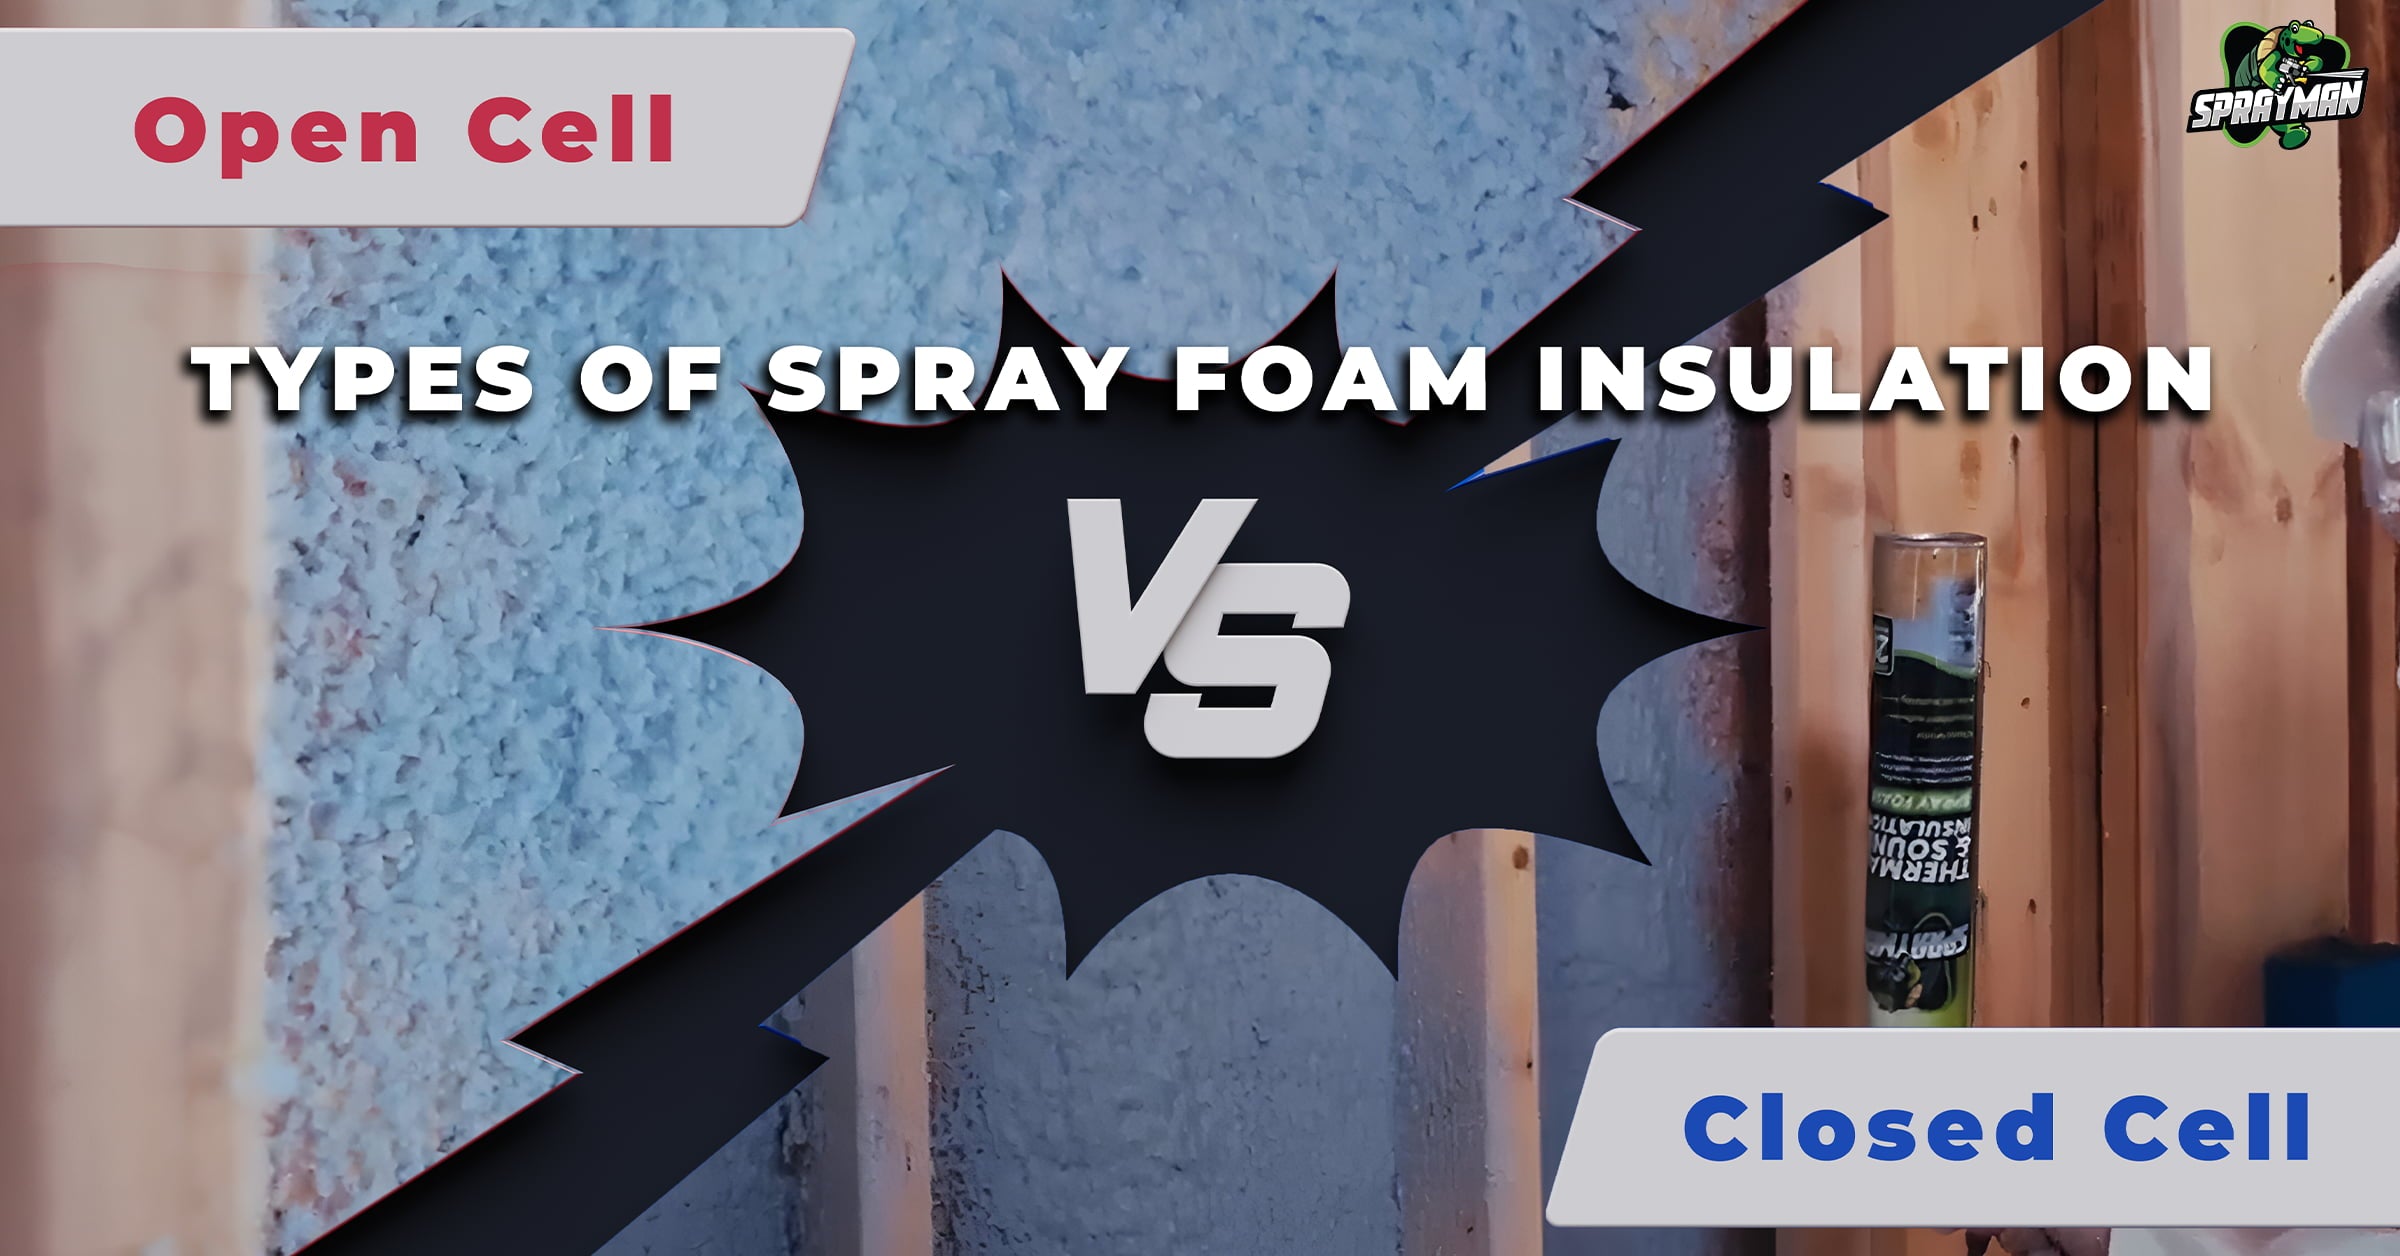 types-of-spray-foam-insulation-open-cell-vs-closed-cell